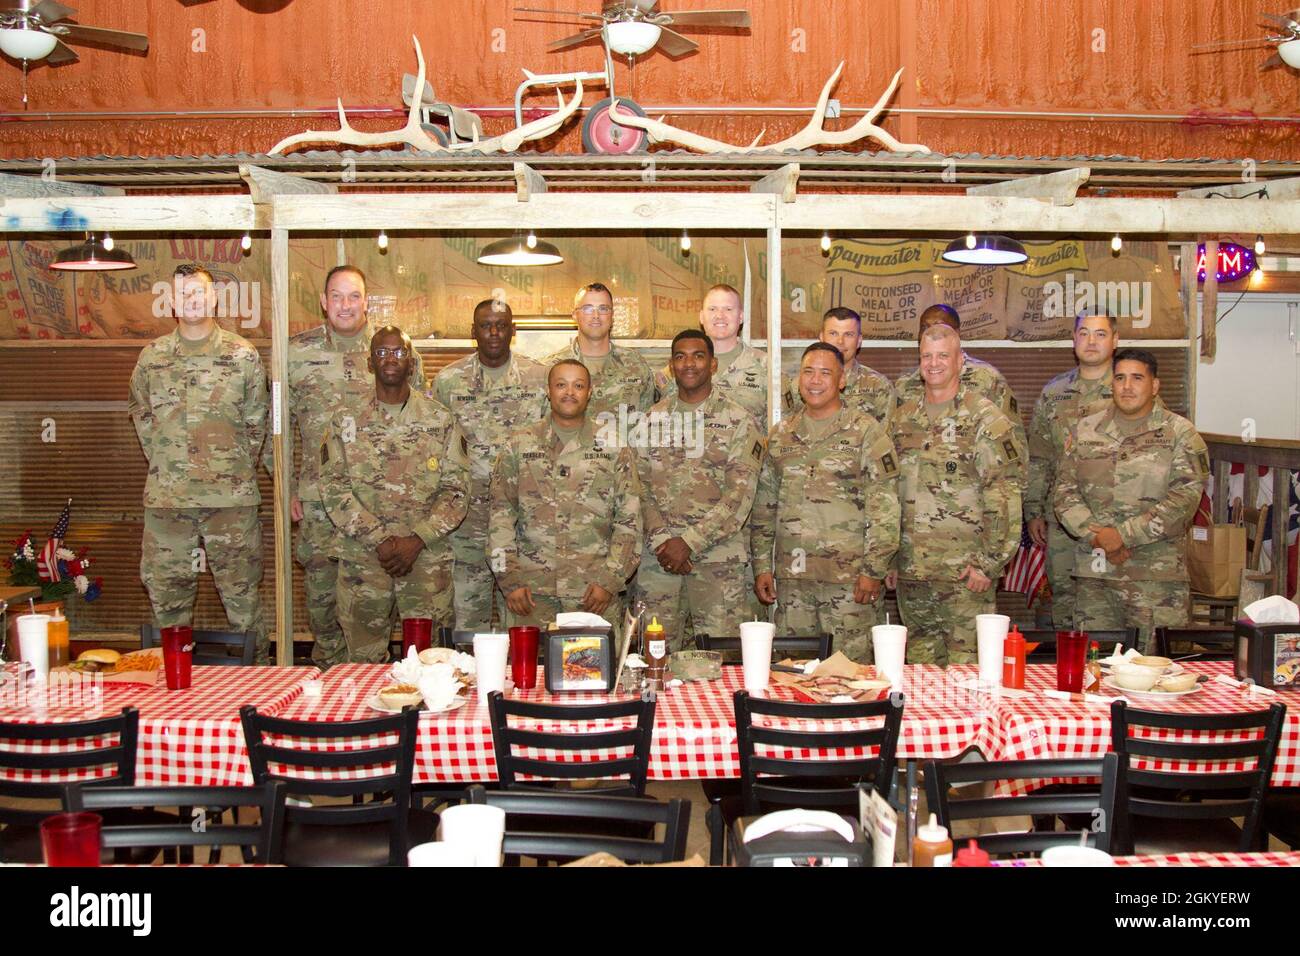 Lt. Gen. Antonio A. Aguto, commanding general of First Army (front row, third from right), and Command Sgt. Maj. John P. McDwyer, command sergeant major of First Army (front row, second from right), join with Division West OC/T Soldiers of 120th Infantry Brigade and 166th Aviation Brigade, during a lunch break at the Barebones BBQ restaurant in Gatesville, Texas, July 28, 2021. Stock Photo